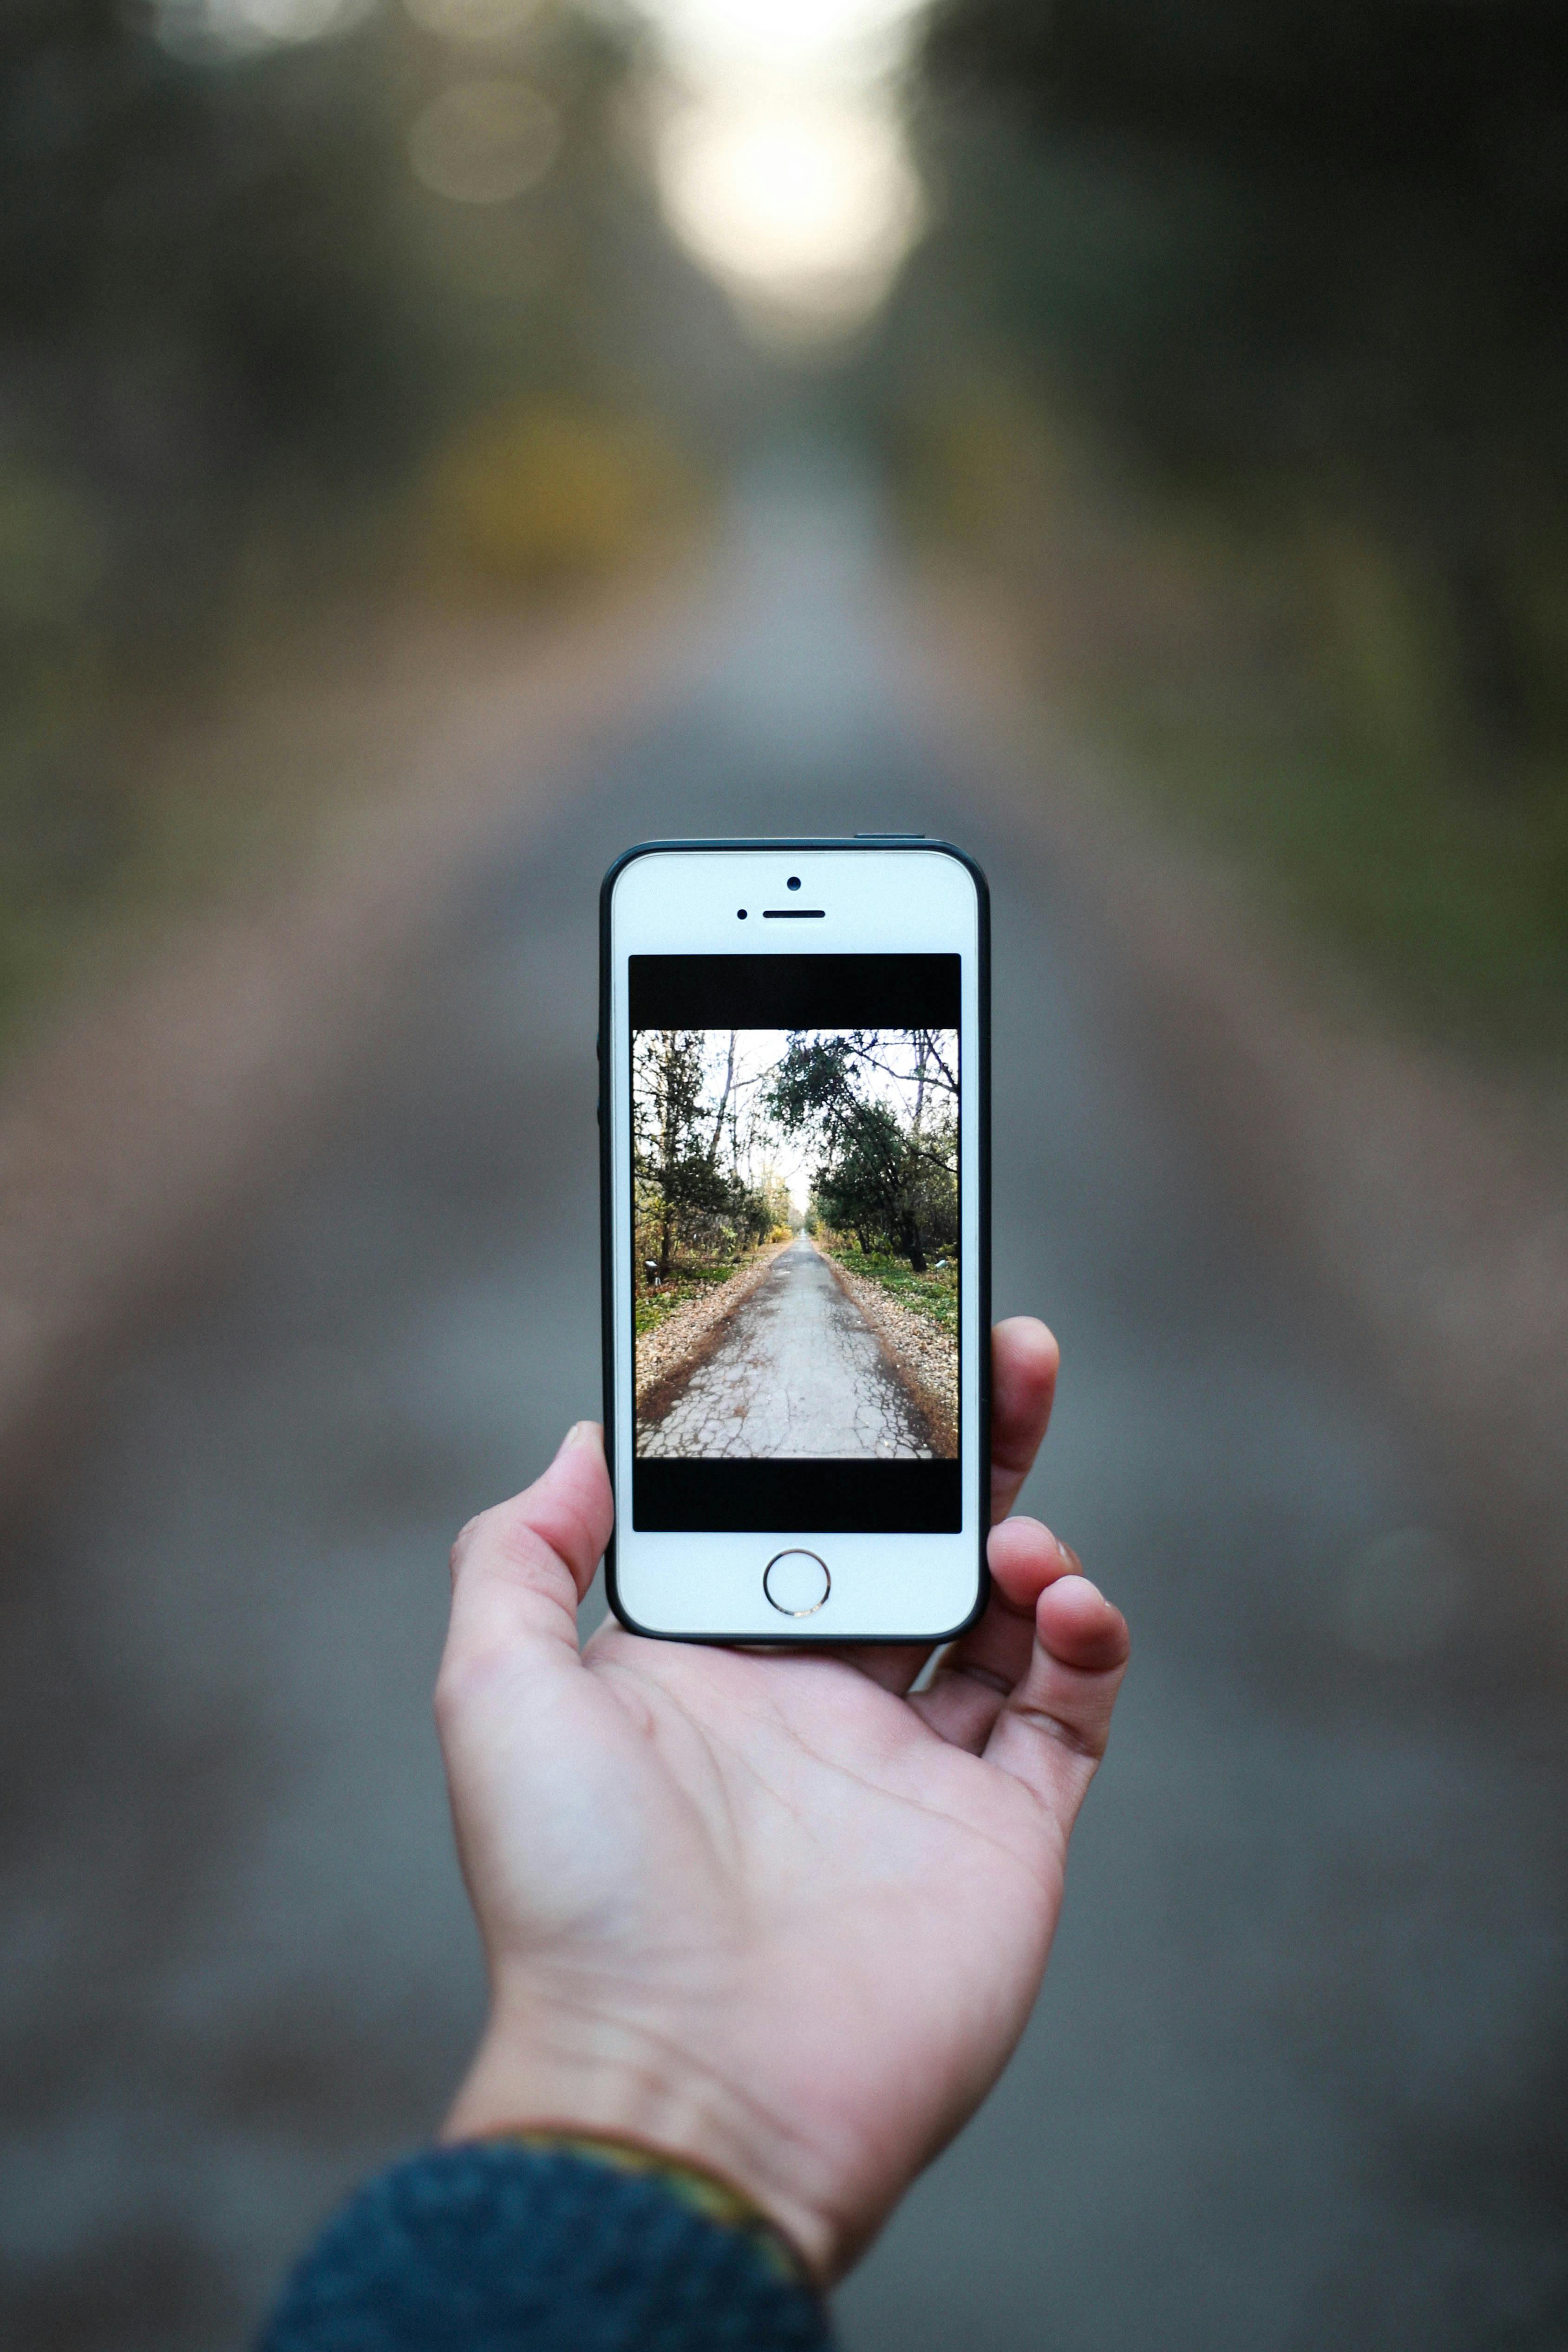 Iphone 6 Photos, Download The BEST Free Iphone 6 Stock Photos & HD Images